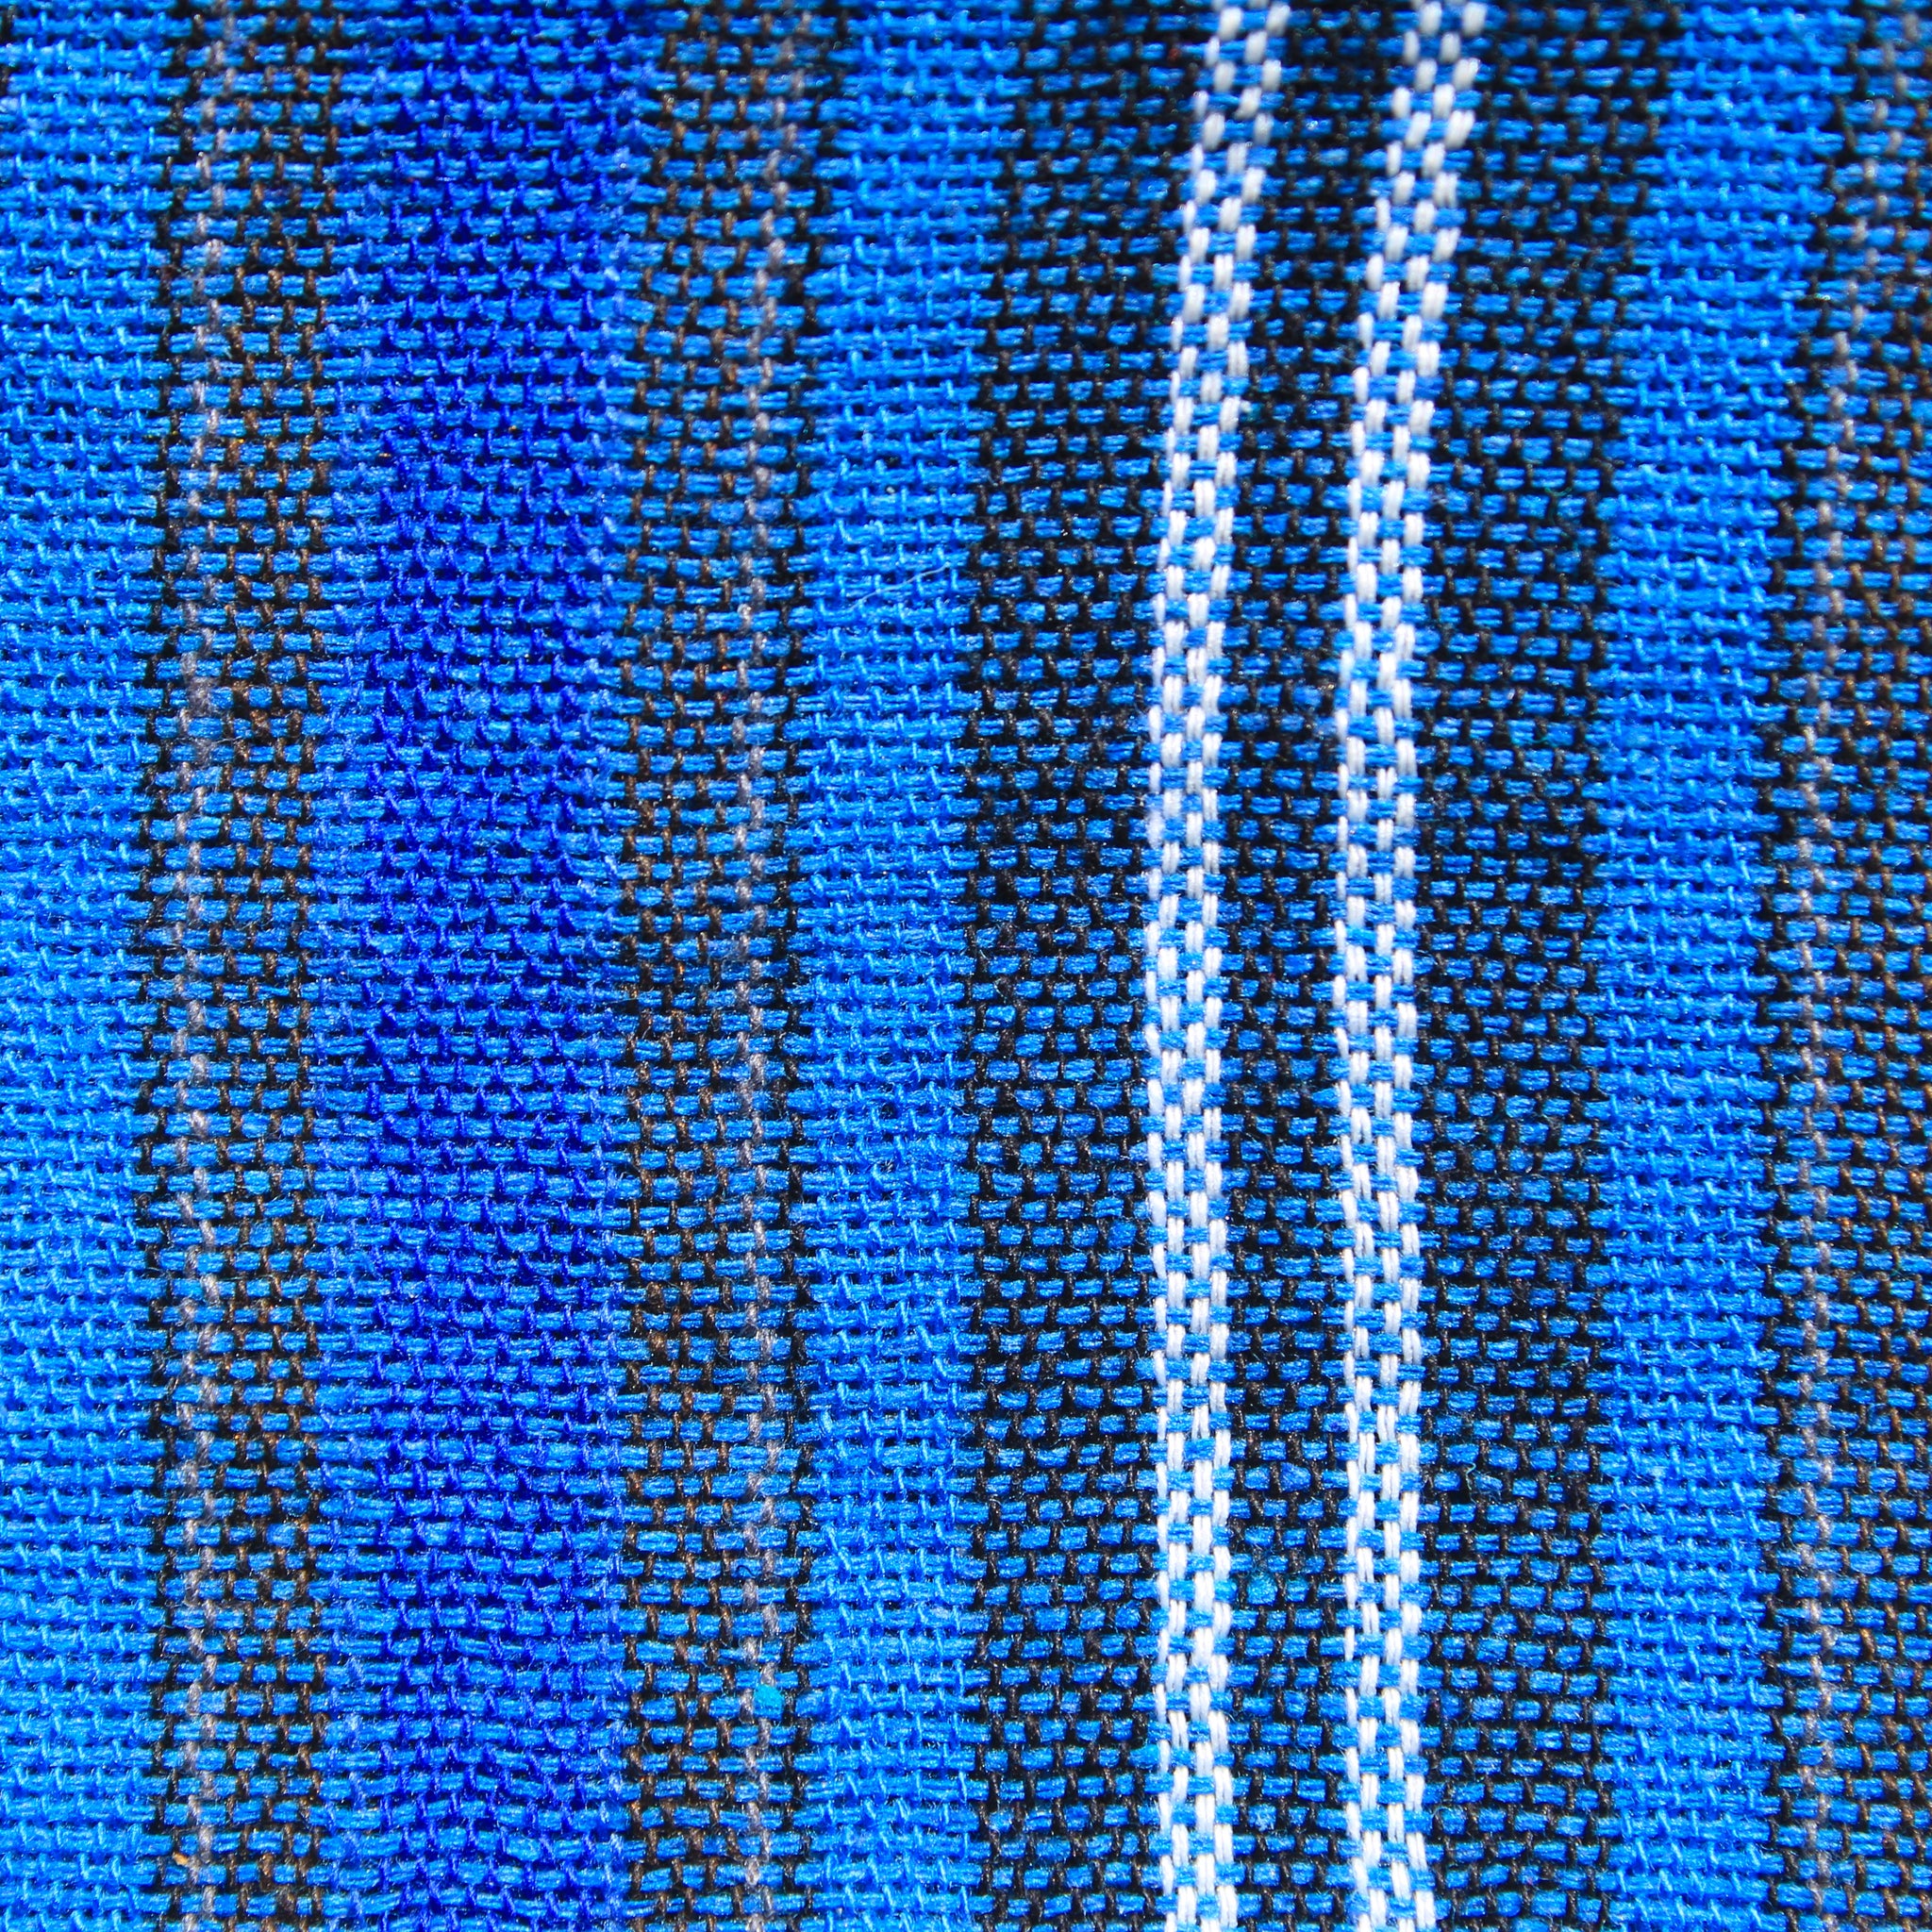 (Large) Blue with White and Grayish stripes 0207